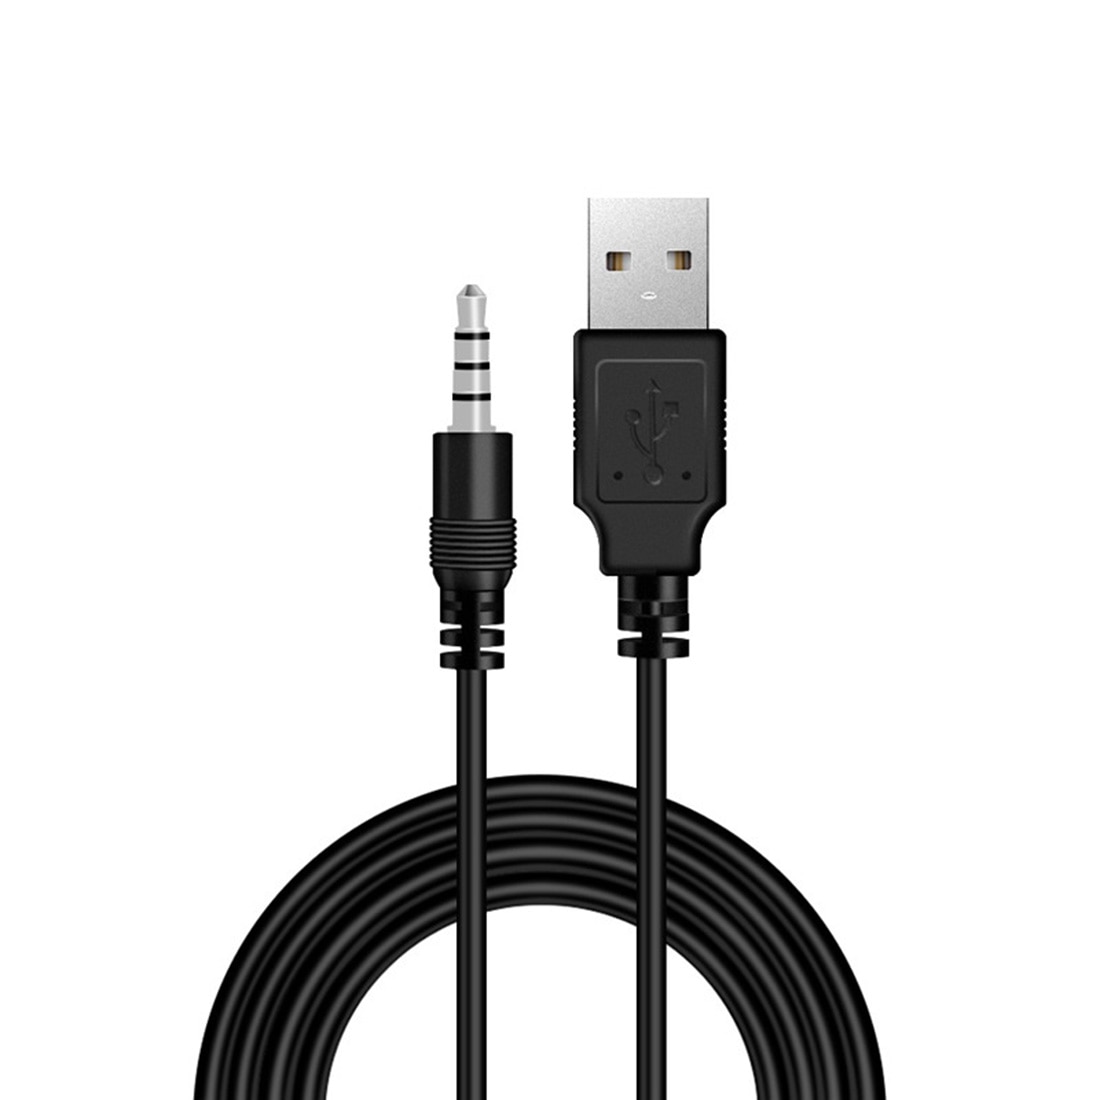 BGNing 95cm USB Charging Cable for DJI OSMO Mobile Handheld Gimbal Charger Connect Power Adapter Wire Stabilizer Accessories